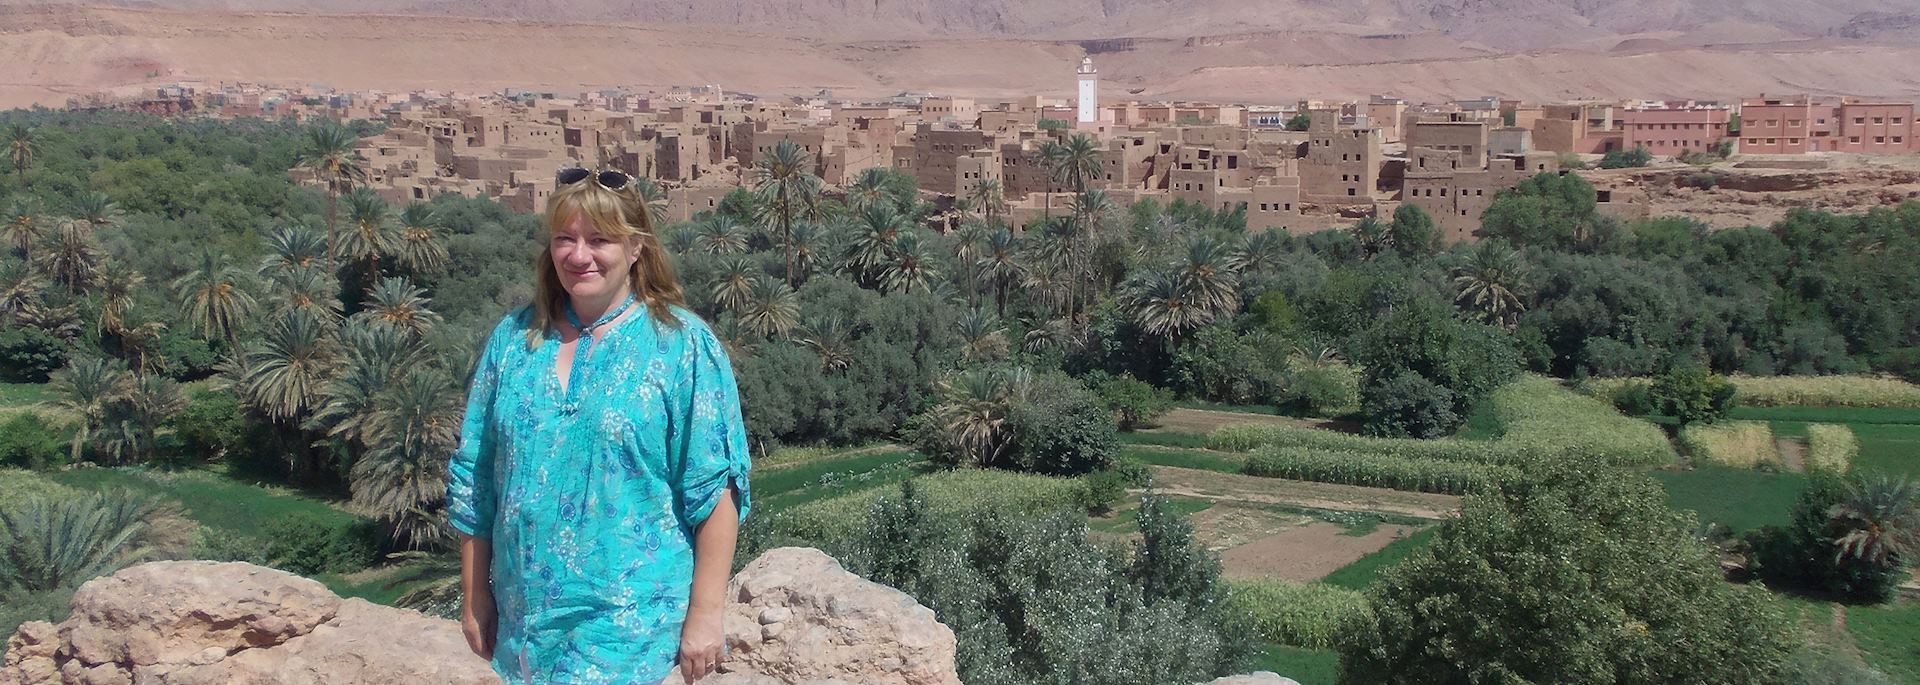 Brigitte visiting the ancient town of Ait Benhaddou, Morocco